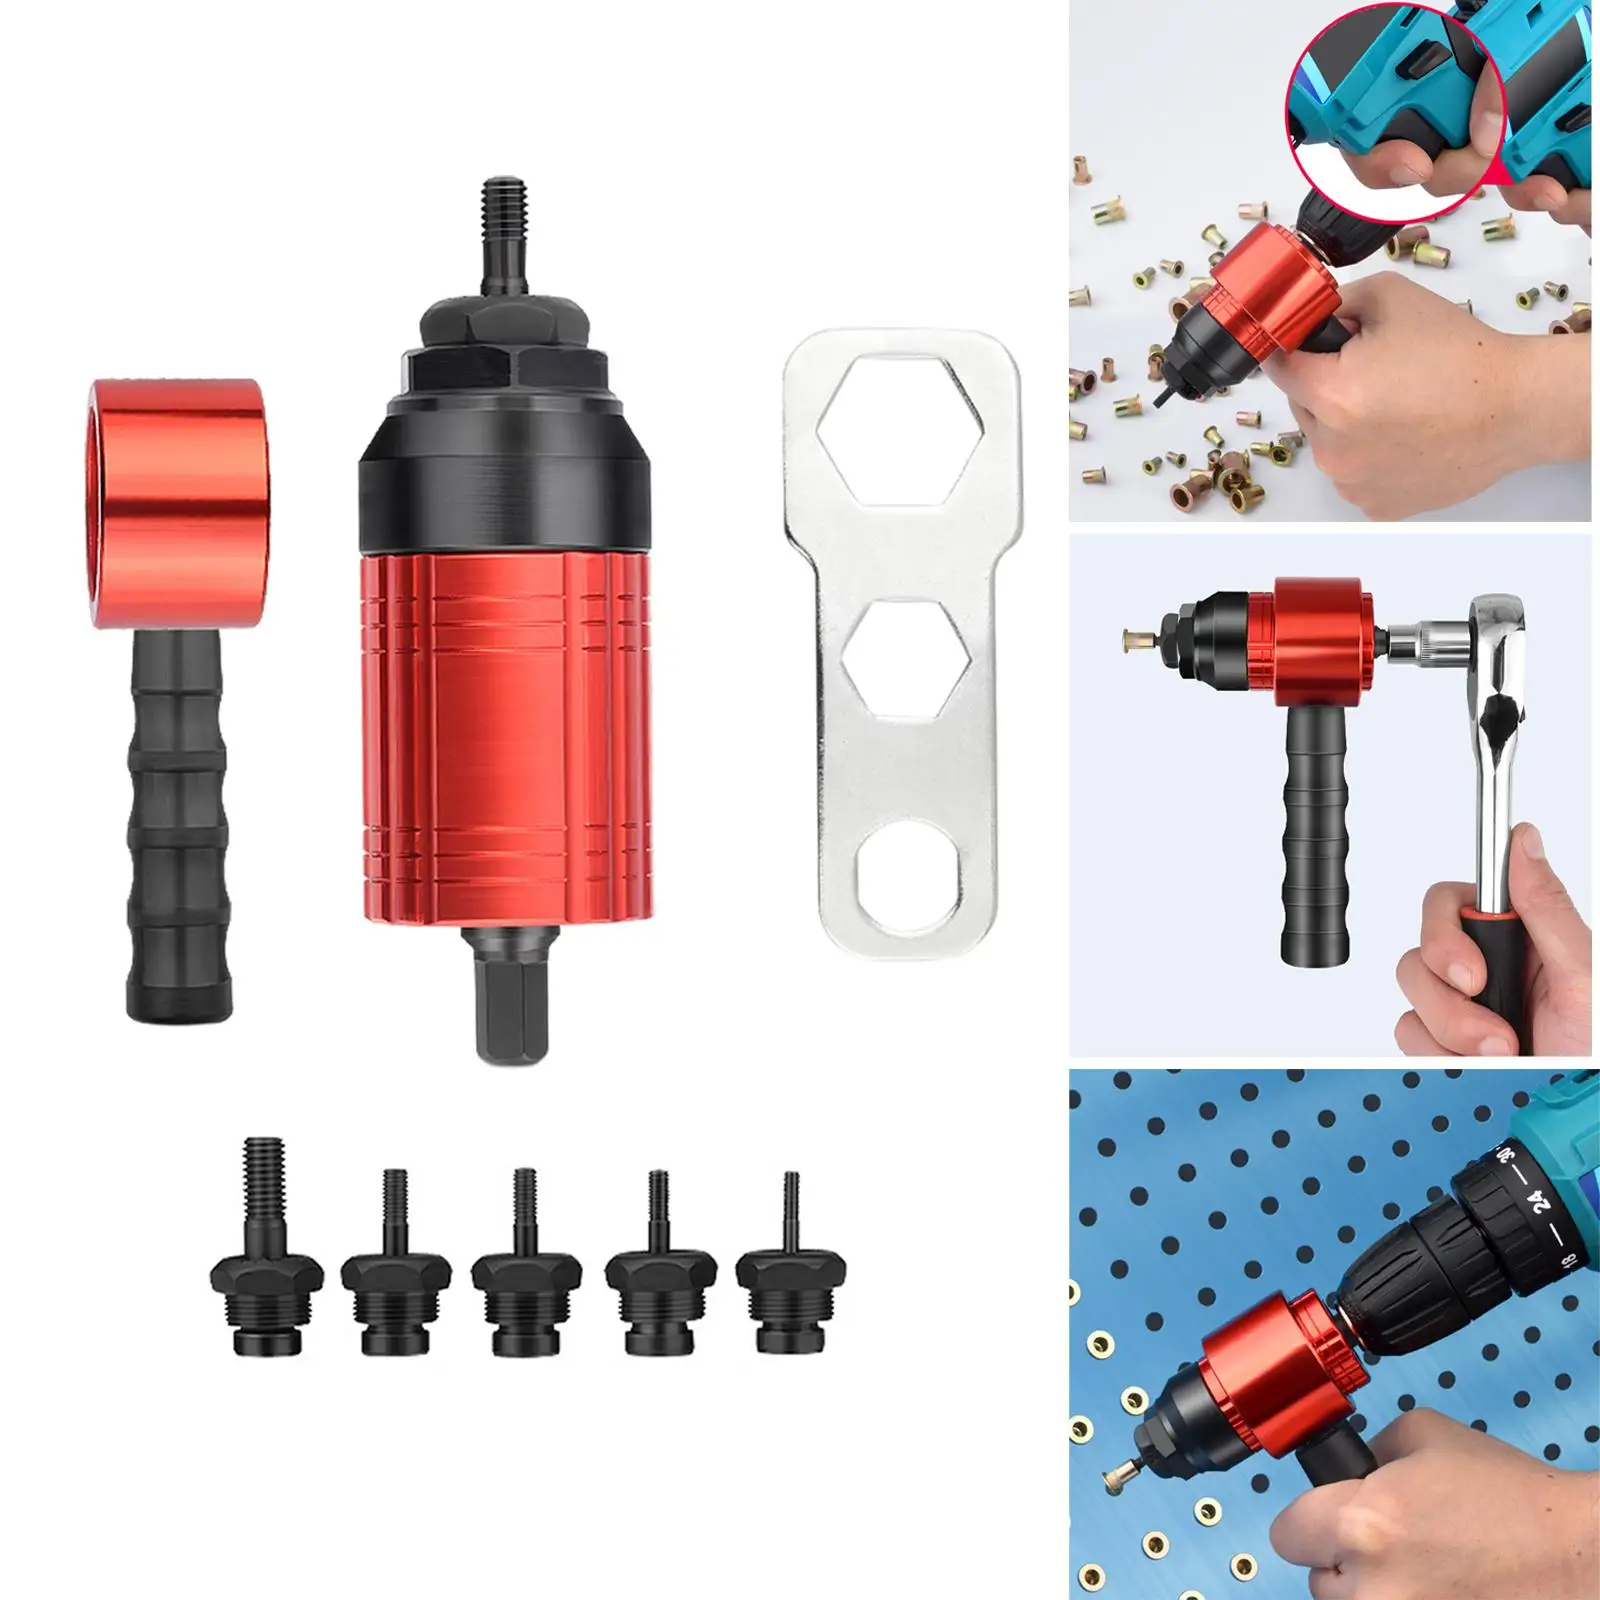 Professional Electric Rivet Nut Adapter Non-Slip Handle for Furniture